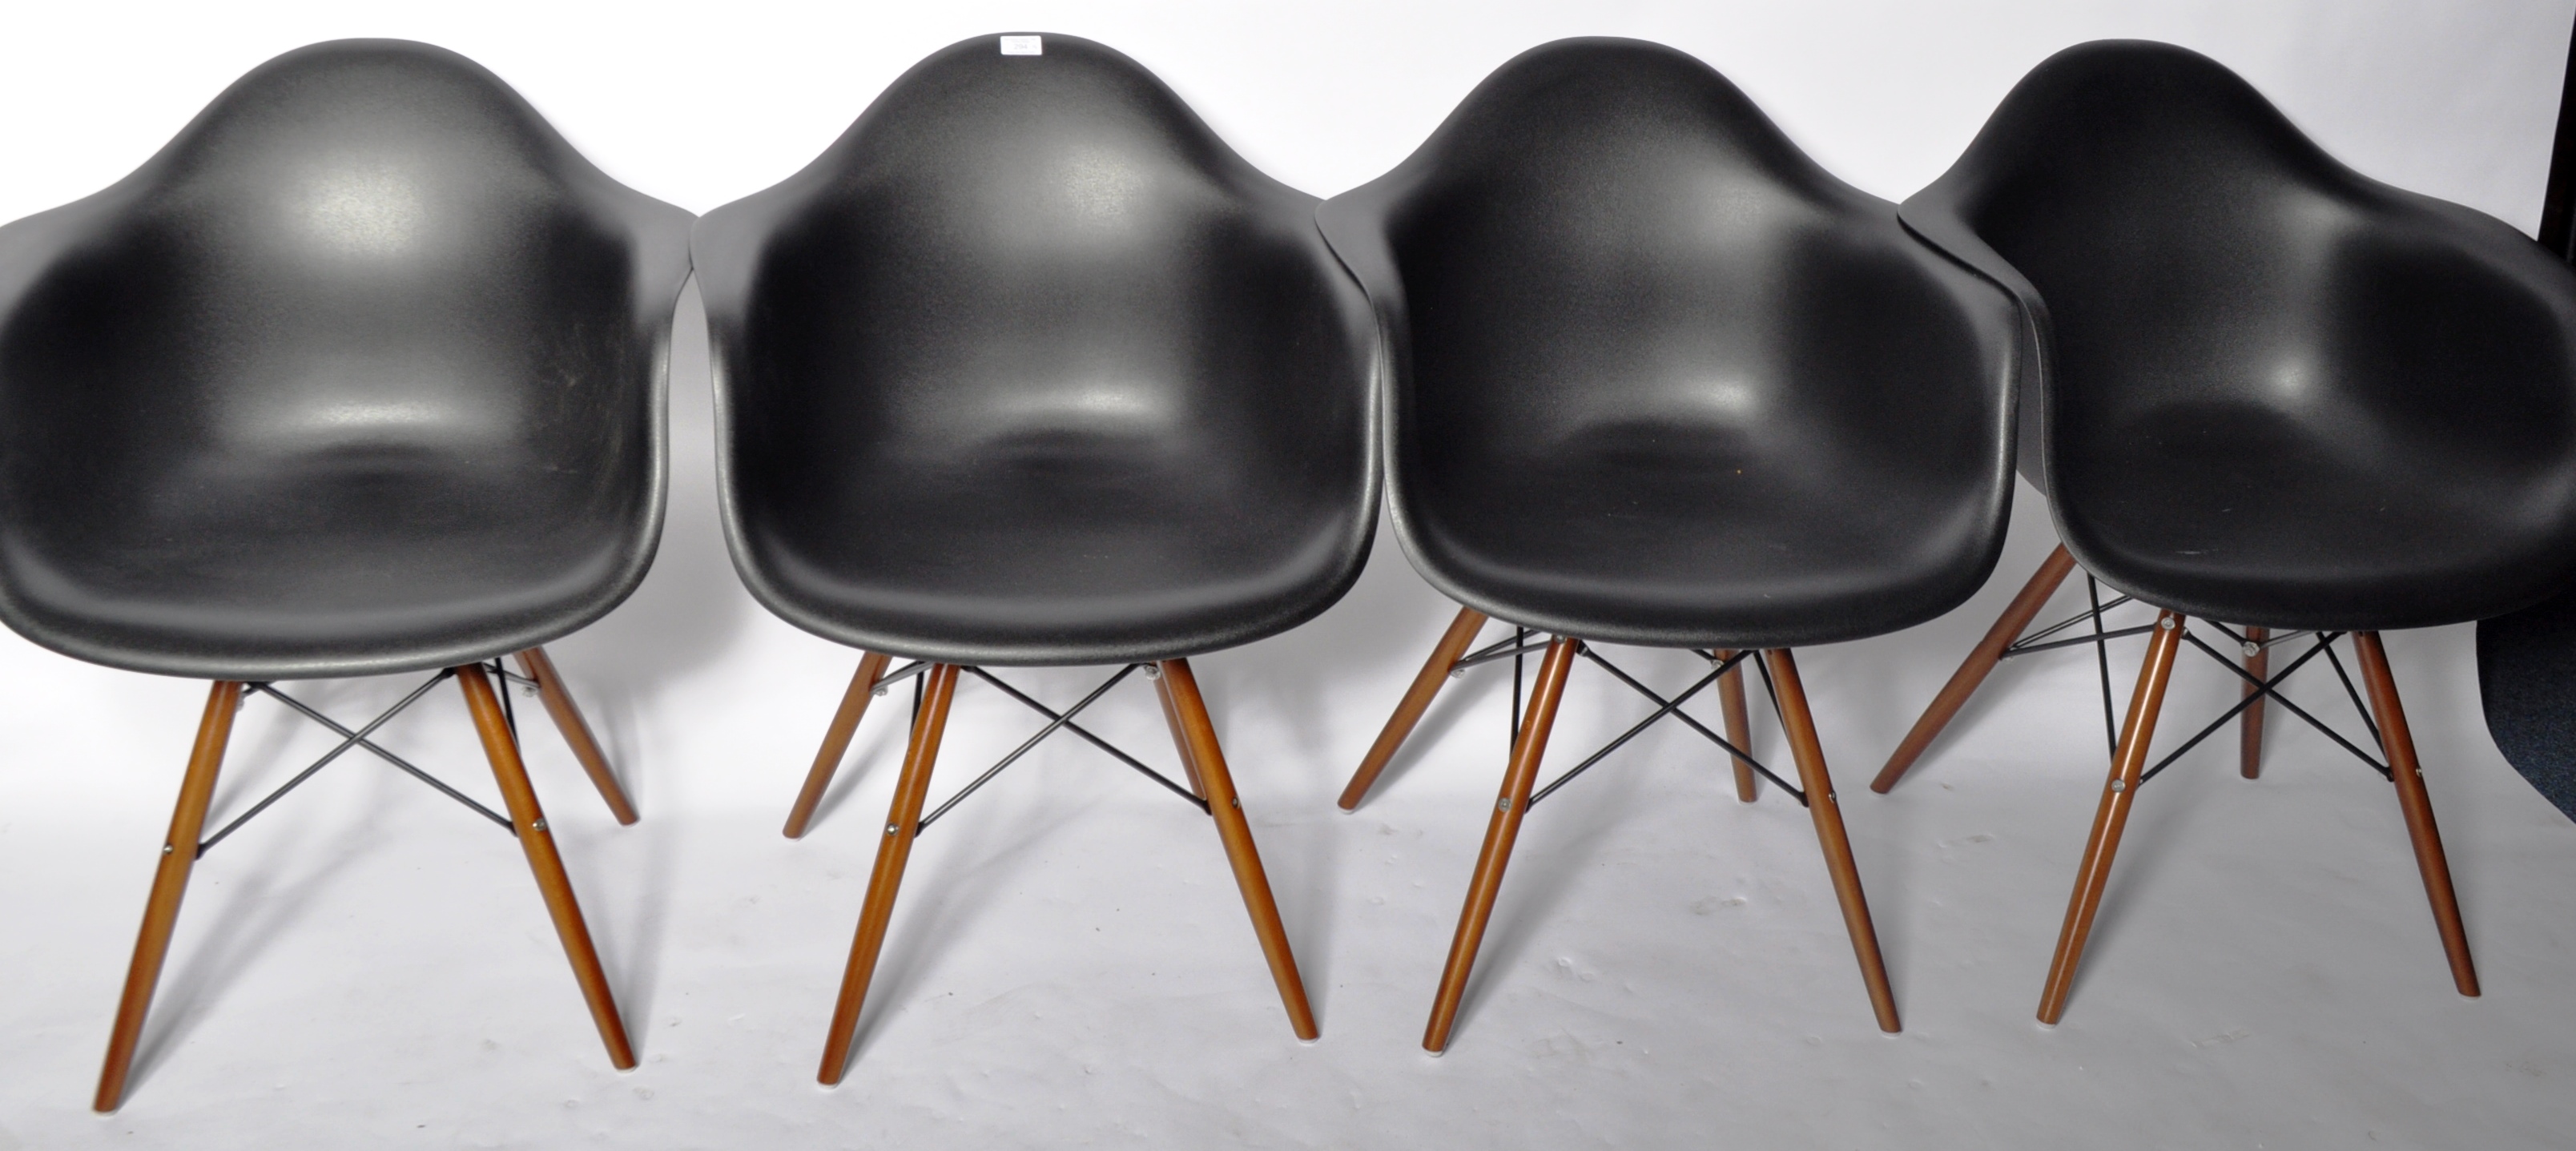 AFTER CHARLES & RAY EAMES - DAW CHAIRS - SET OF DINING CHAIRS - Image 2 of 5